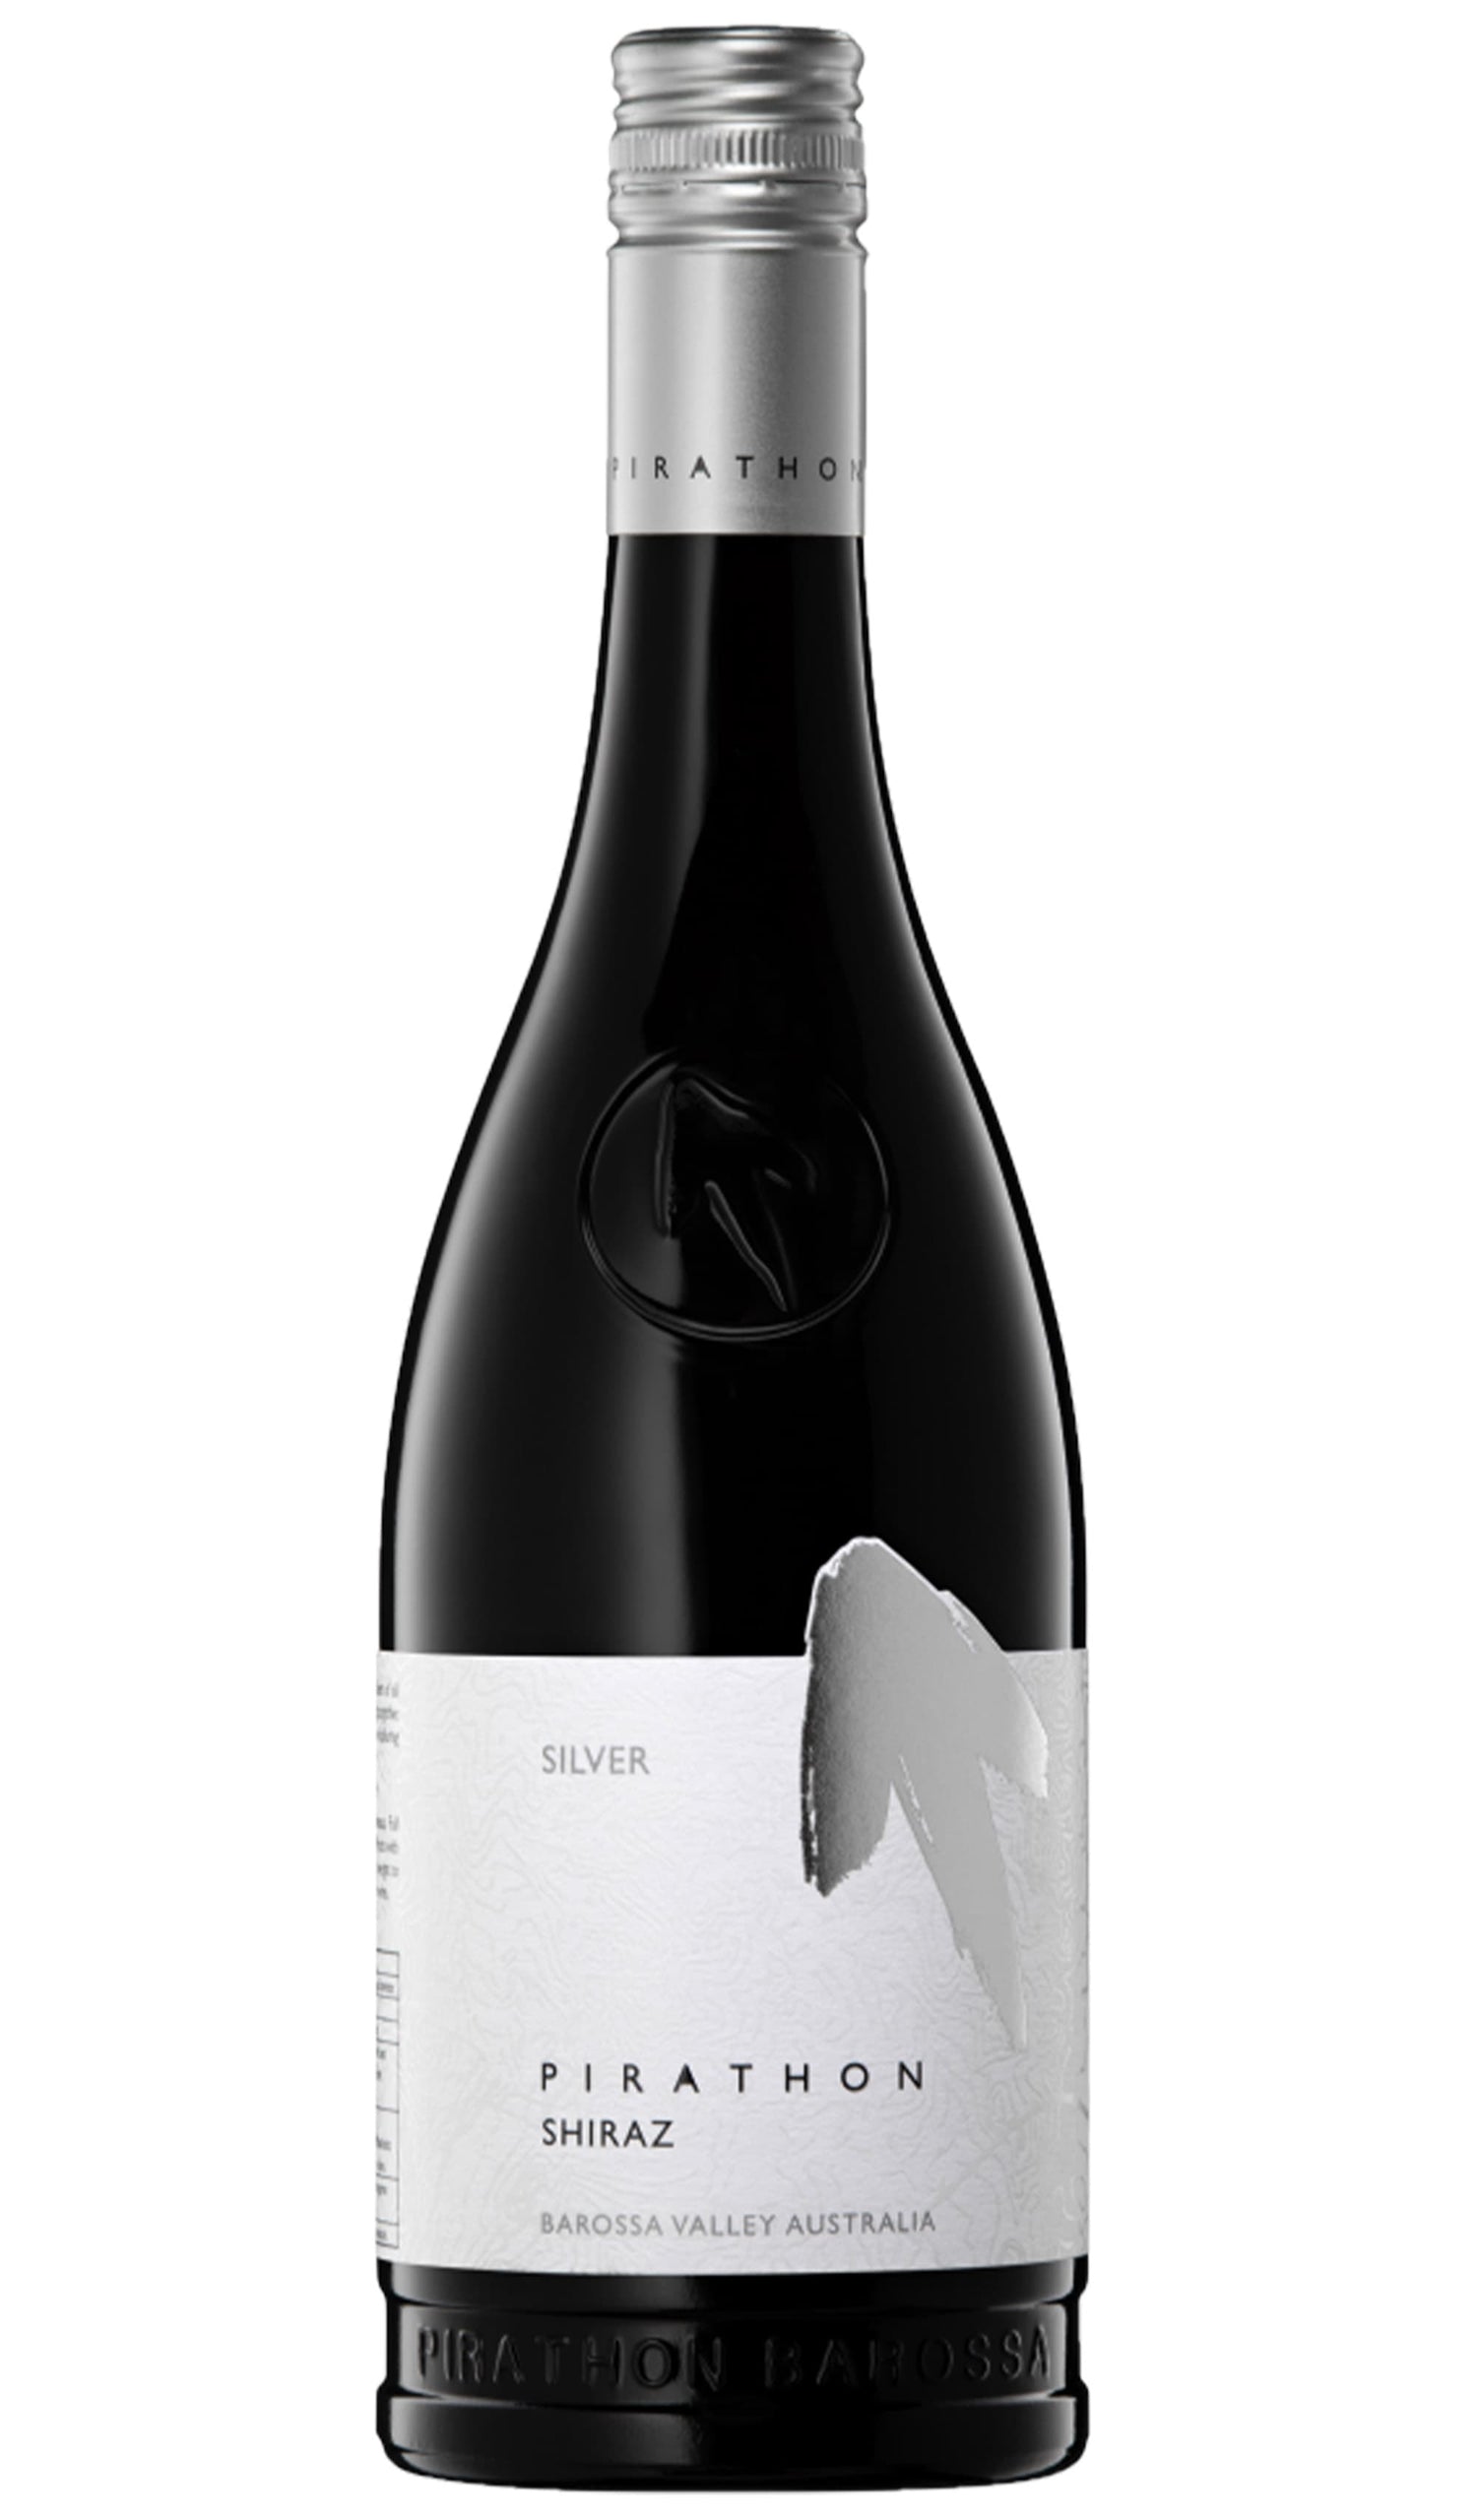 Find out more or buy Pirathon 'Silver' Shiraz 2019 (Barossa Valley) online at Wine Sellers Direct - Australia’s independent liquor specialists.